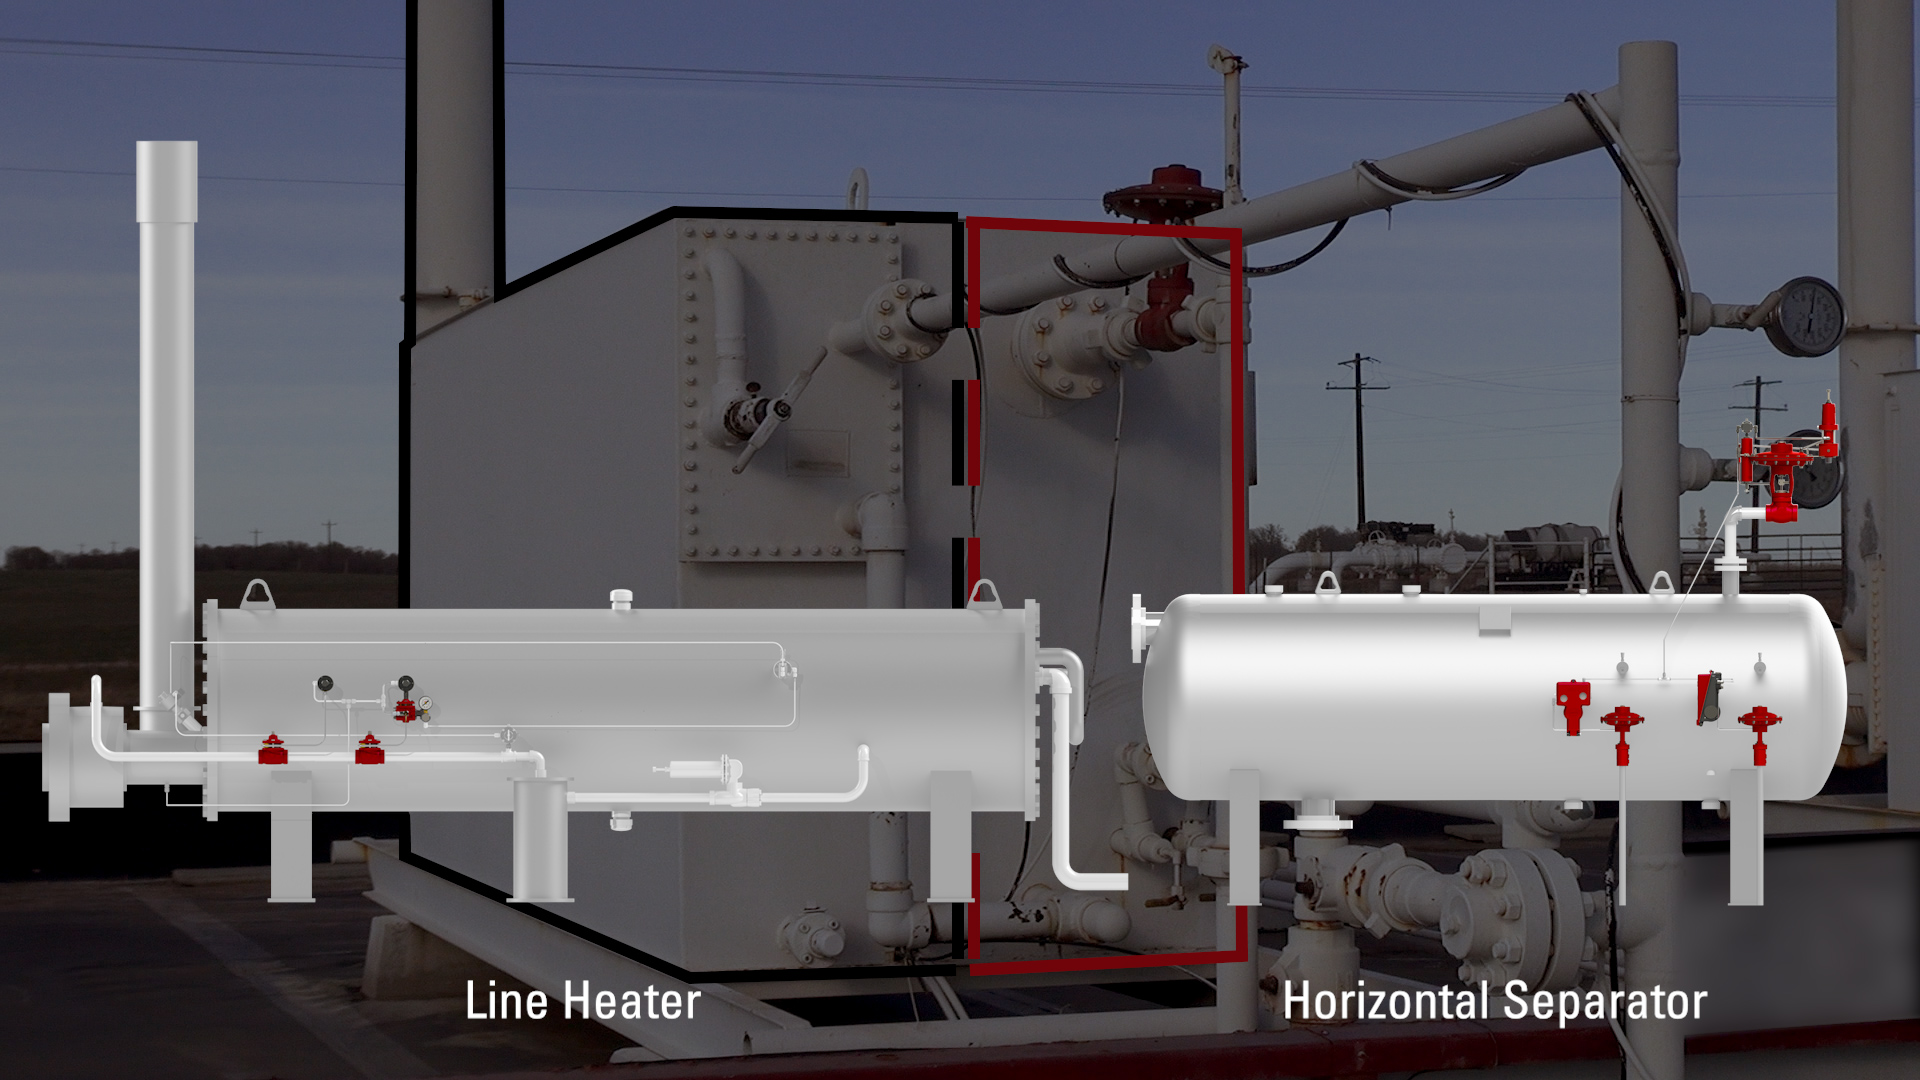 Illustration and Photo of a Line Heater that Heats the Gas and a Separator that Dries the Gas